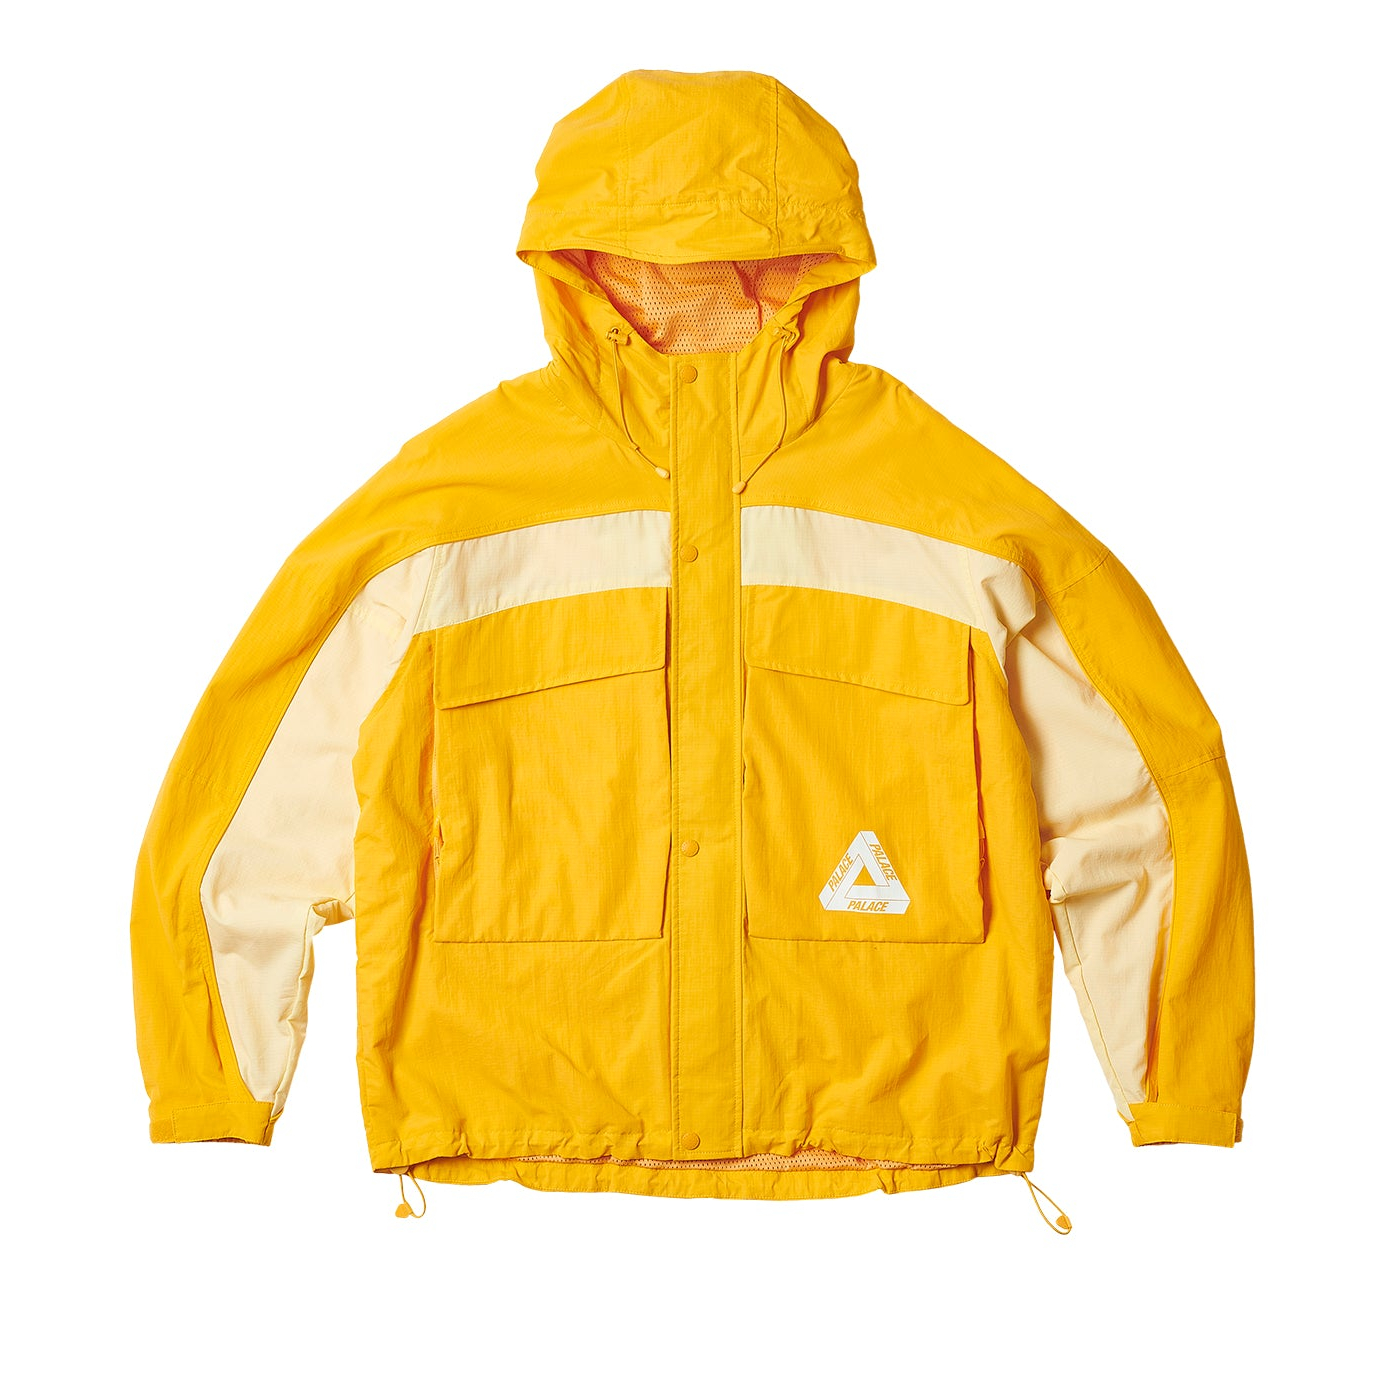 Thumbnail GONE FISHING JACKET YELLOW one color